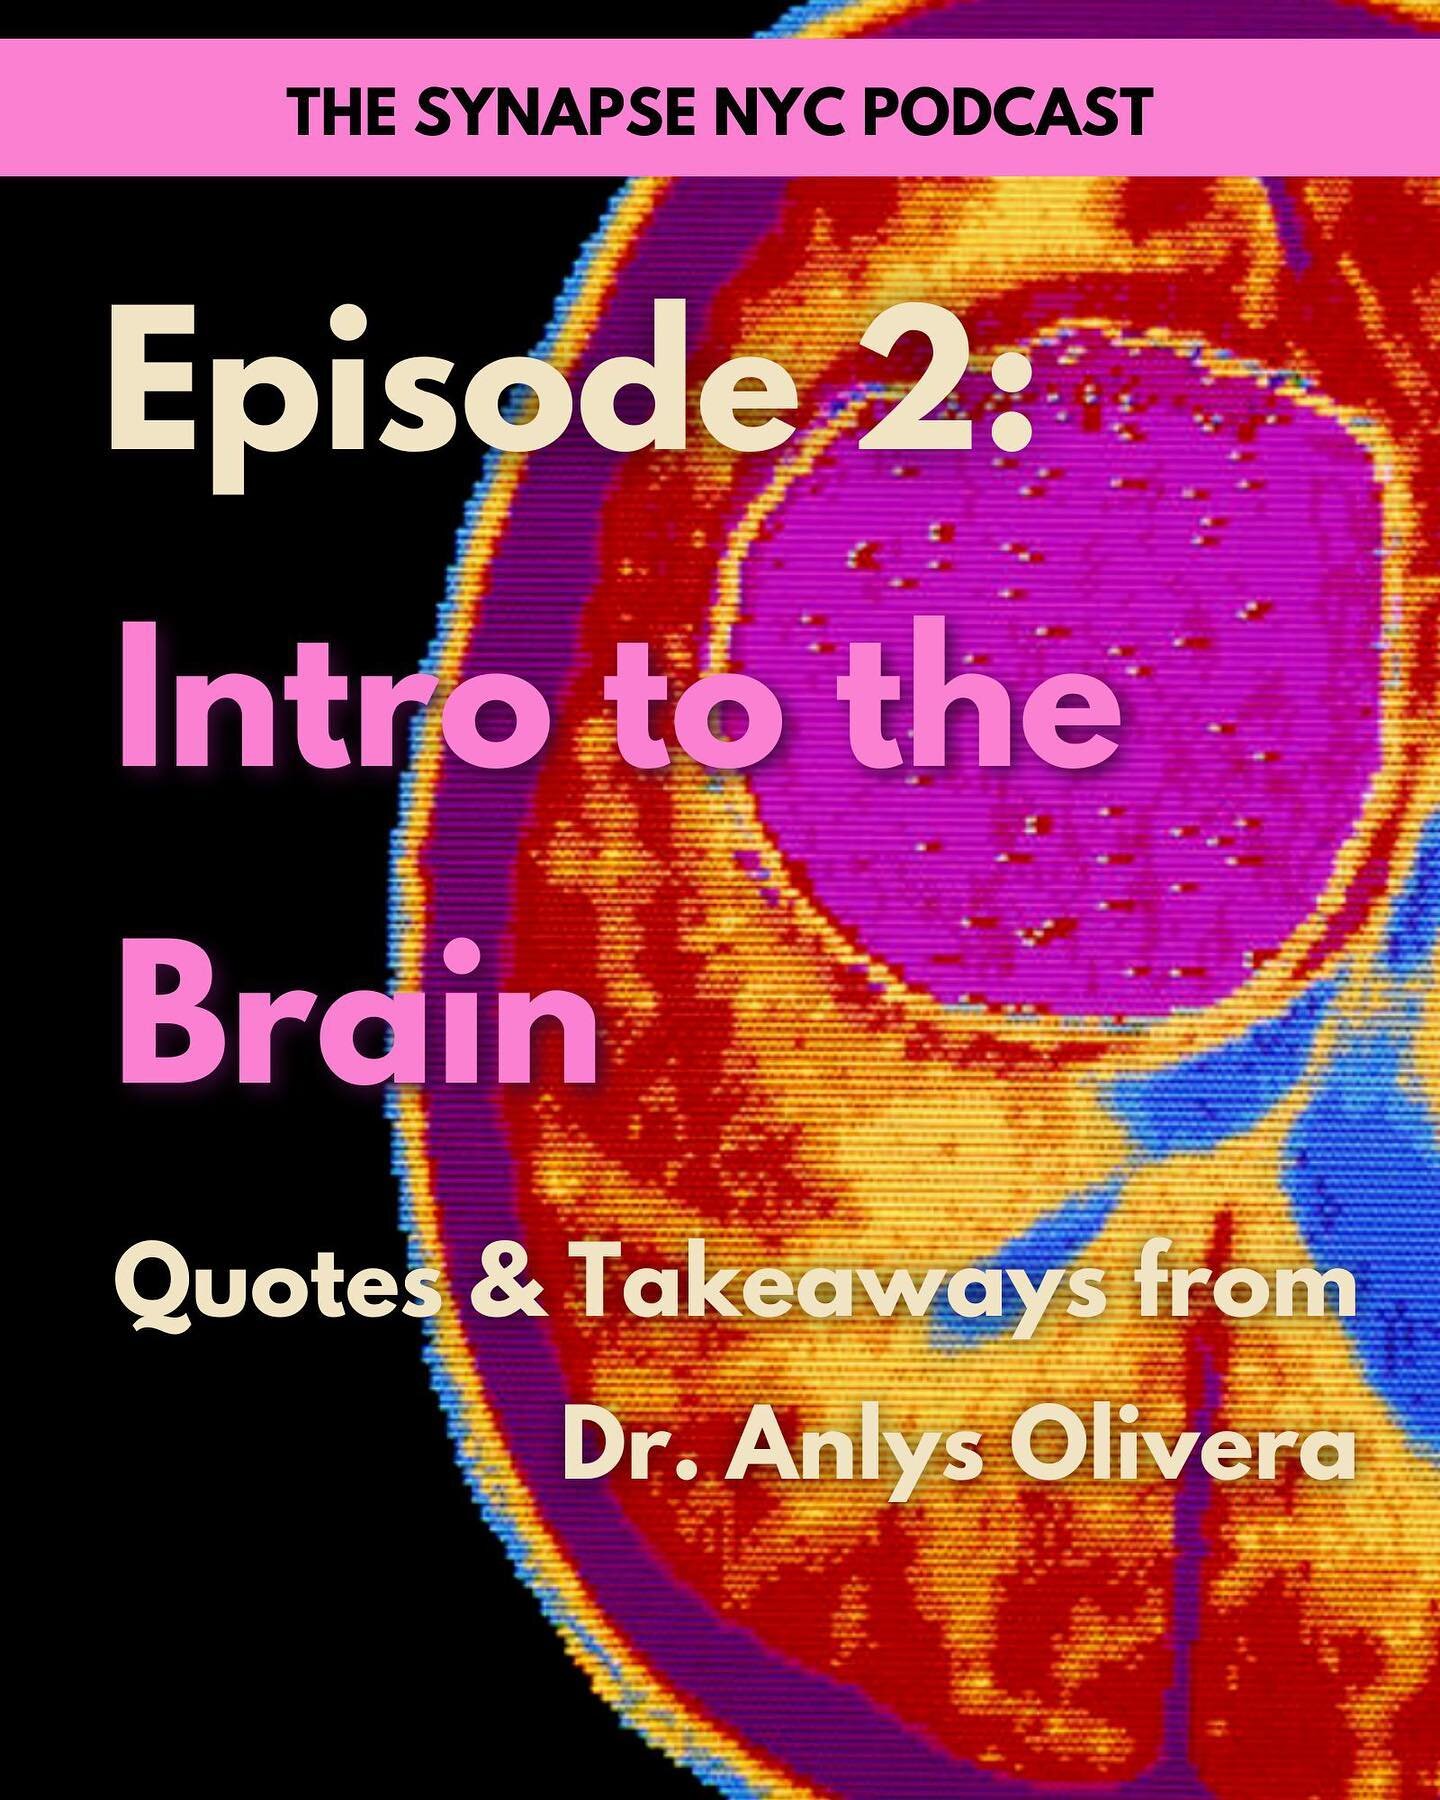 In order to understand the brain and its multiple functions, we first need to learn about neurons. 
What are neurons? What do neurotransmitters do? And what is their role in various psychological processes? 

In the second episode of THE SYNAPSE NYC 